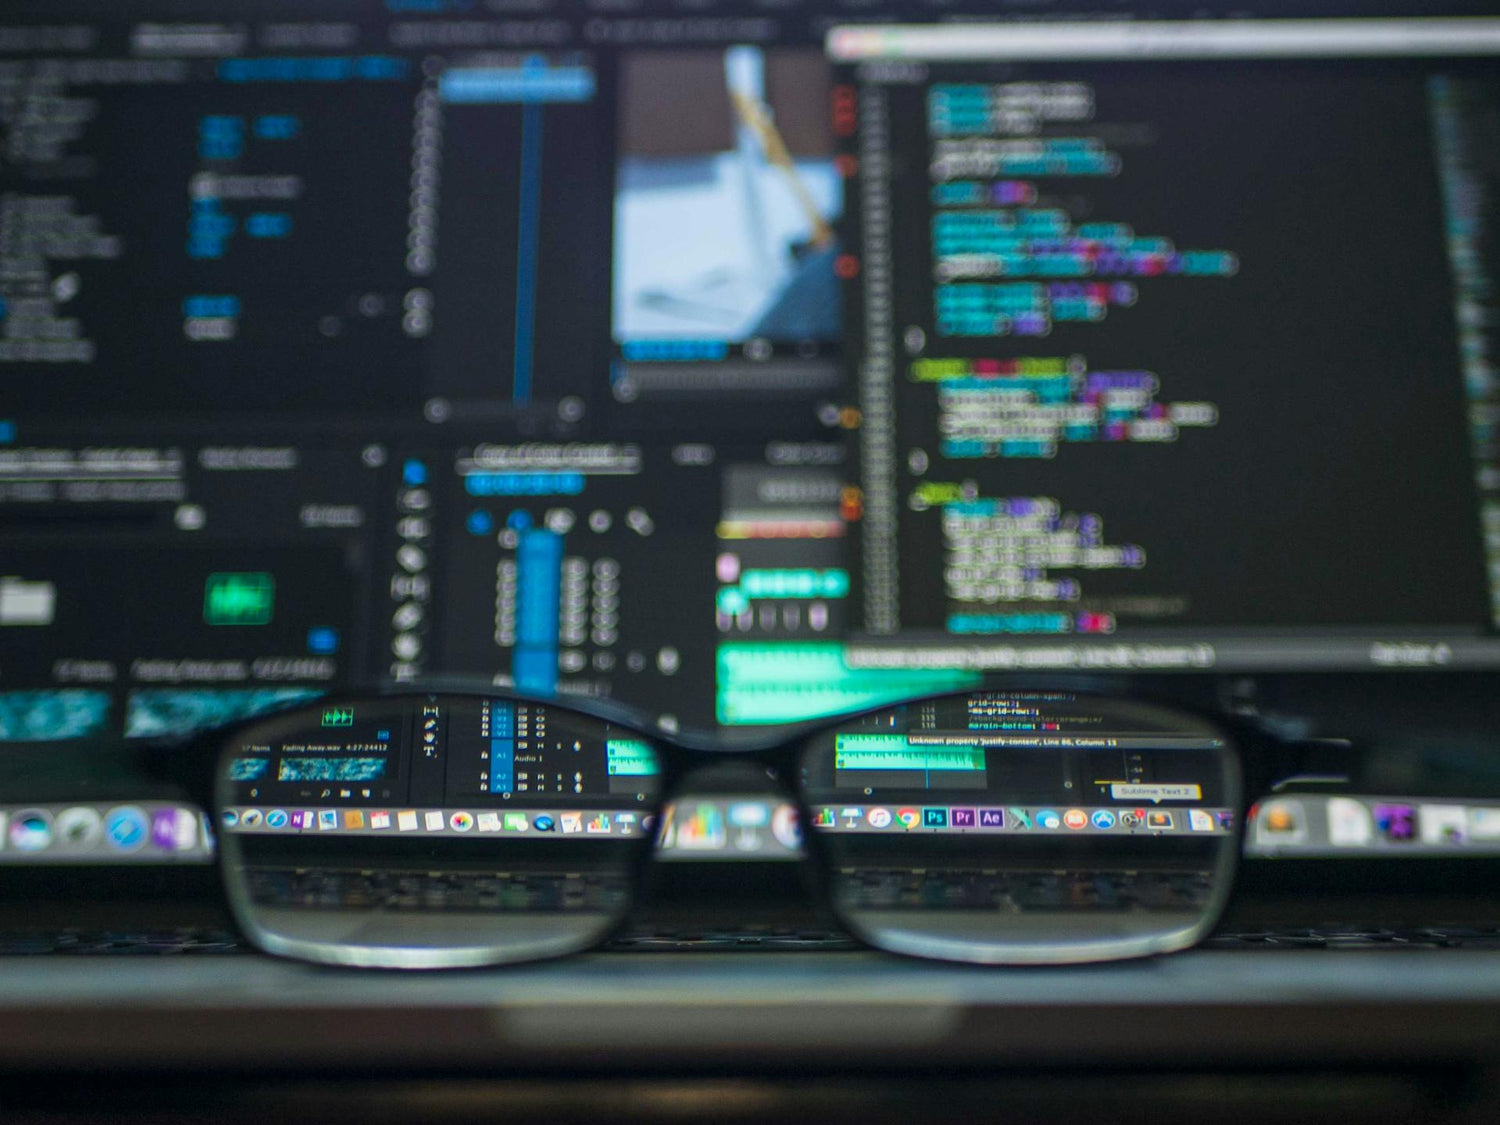 Picture of glasses on a desk in front of a computer screen with coding to symbolize technology transformation via software and hardware development including websites, digital marketing, ecommerce, consumer electronics, and other development